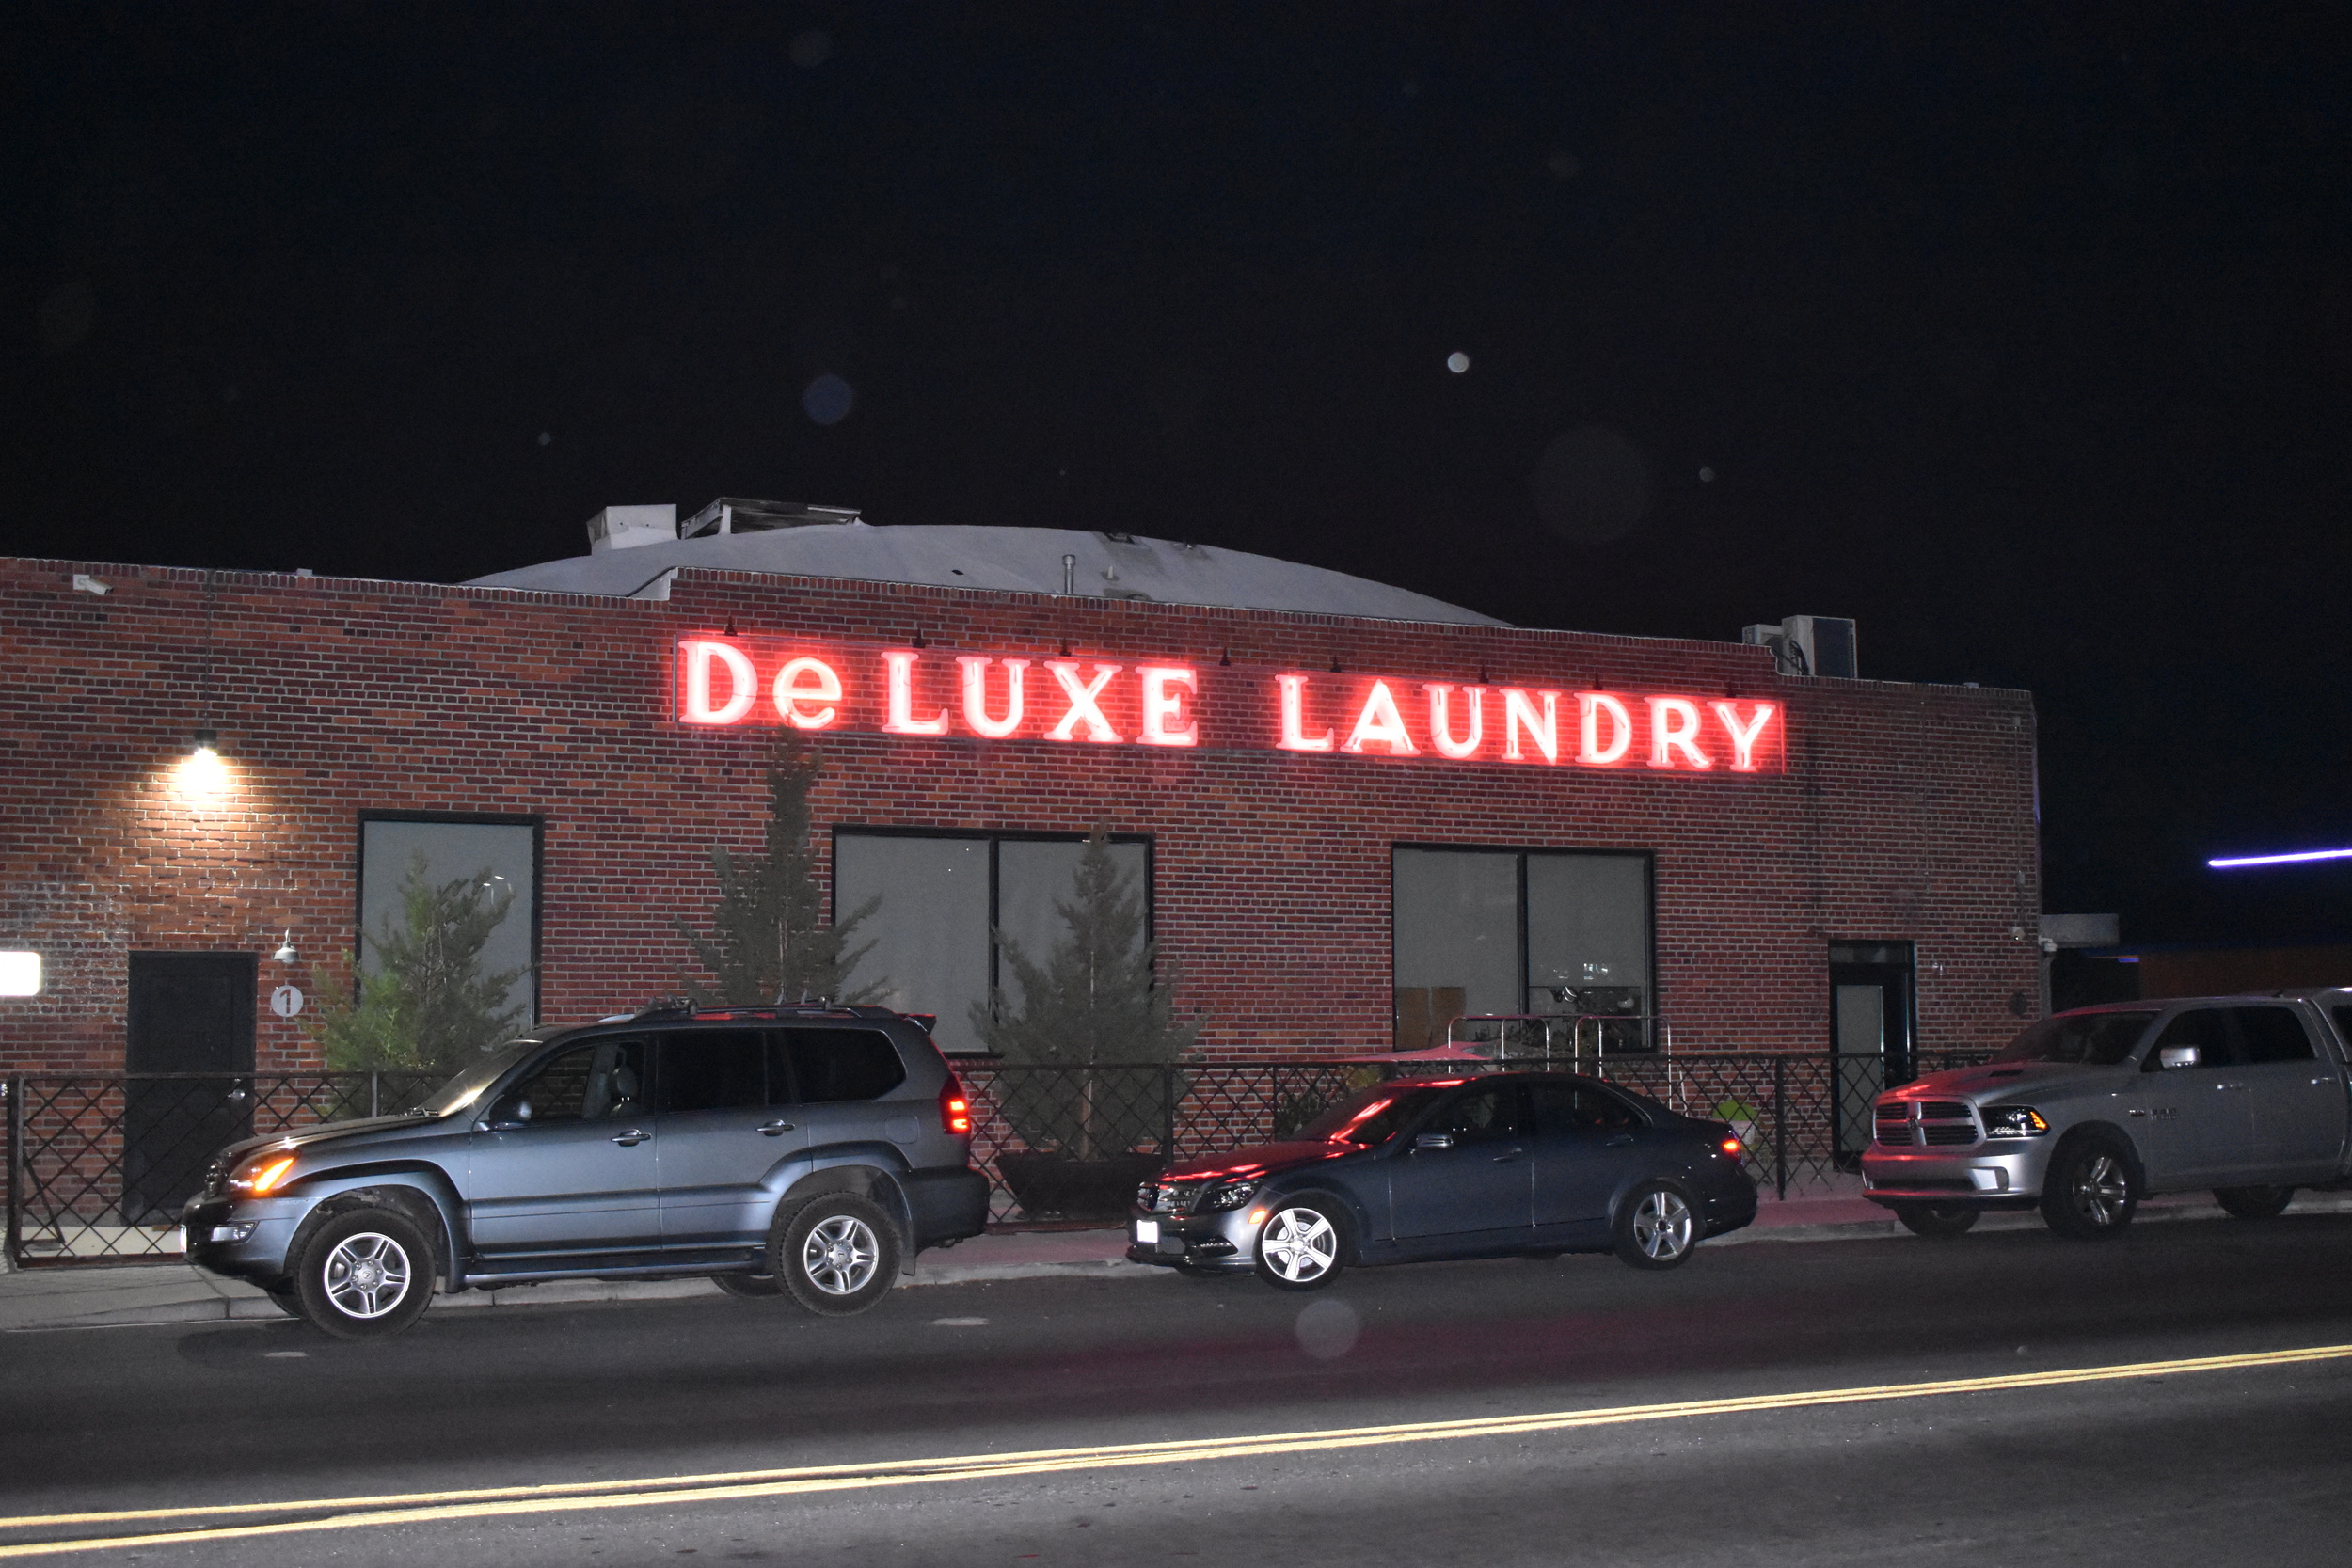 DeLuxe Laundry wall mounted sign, Reno, Nevada